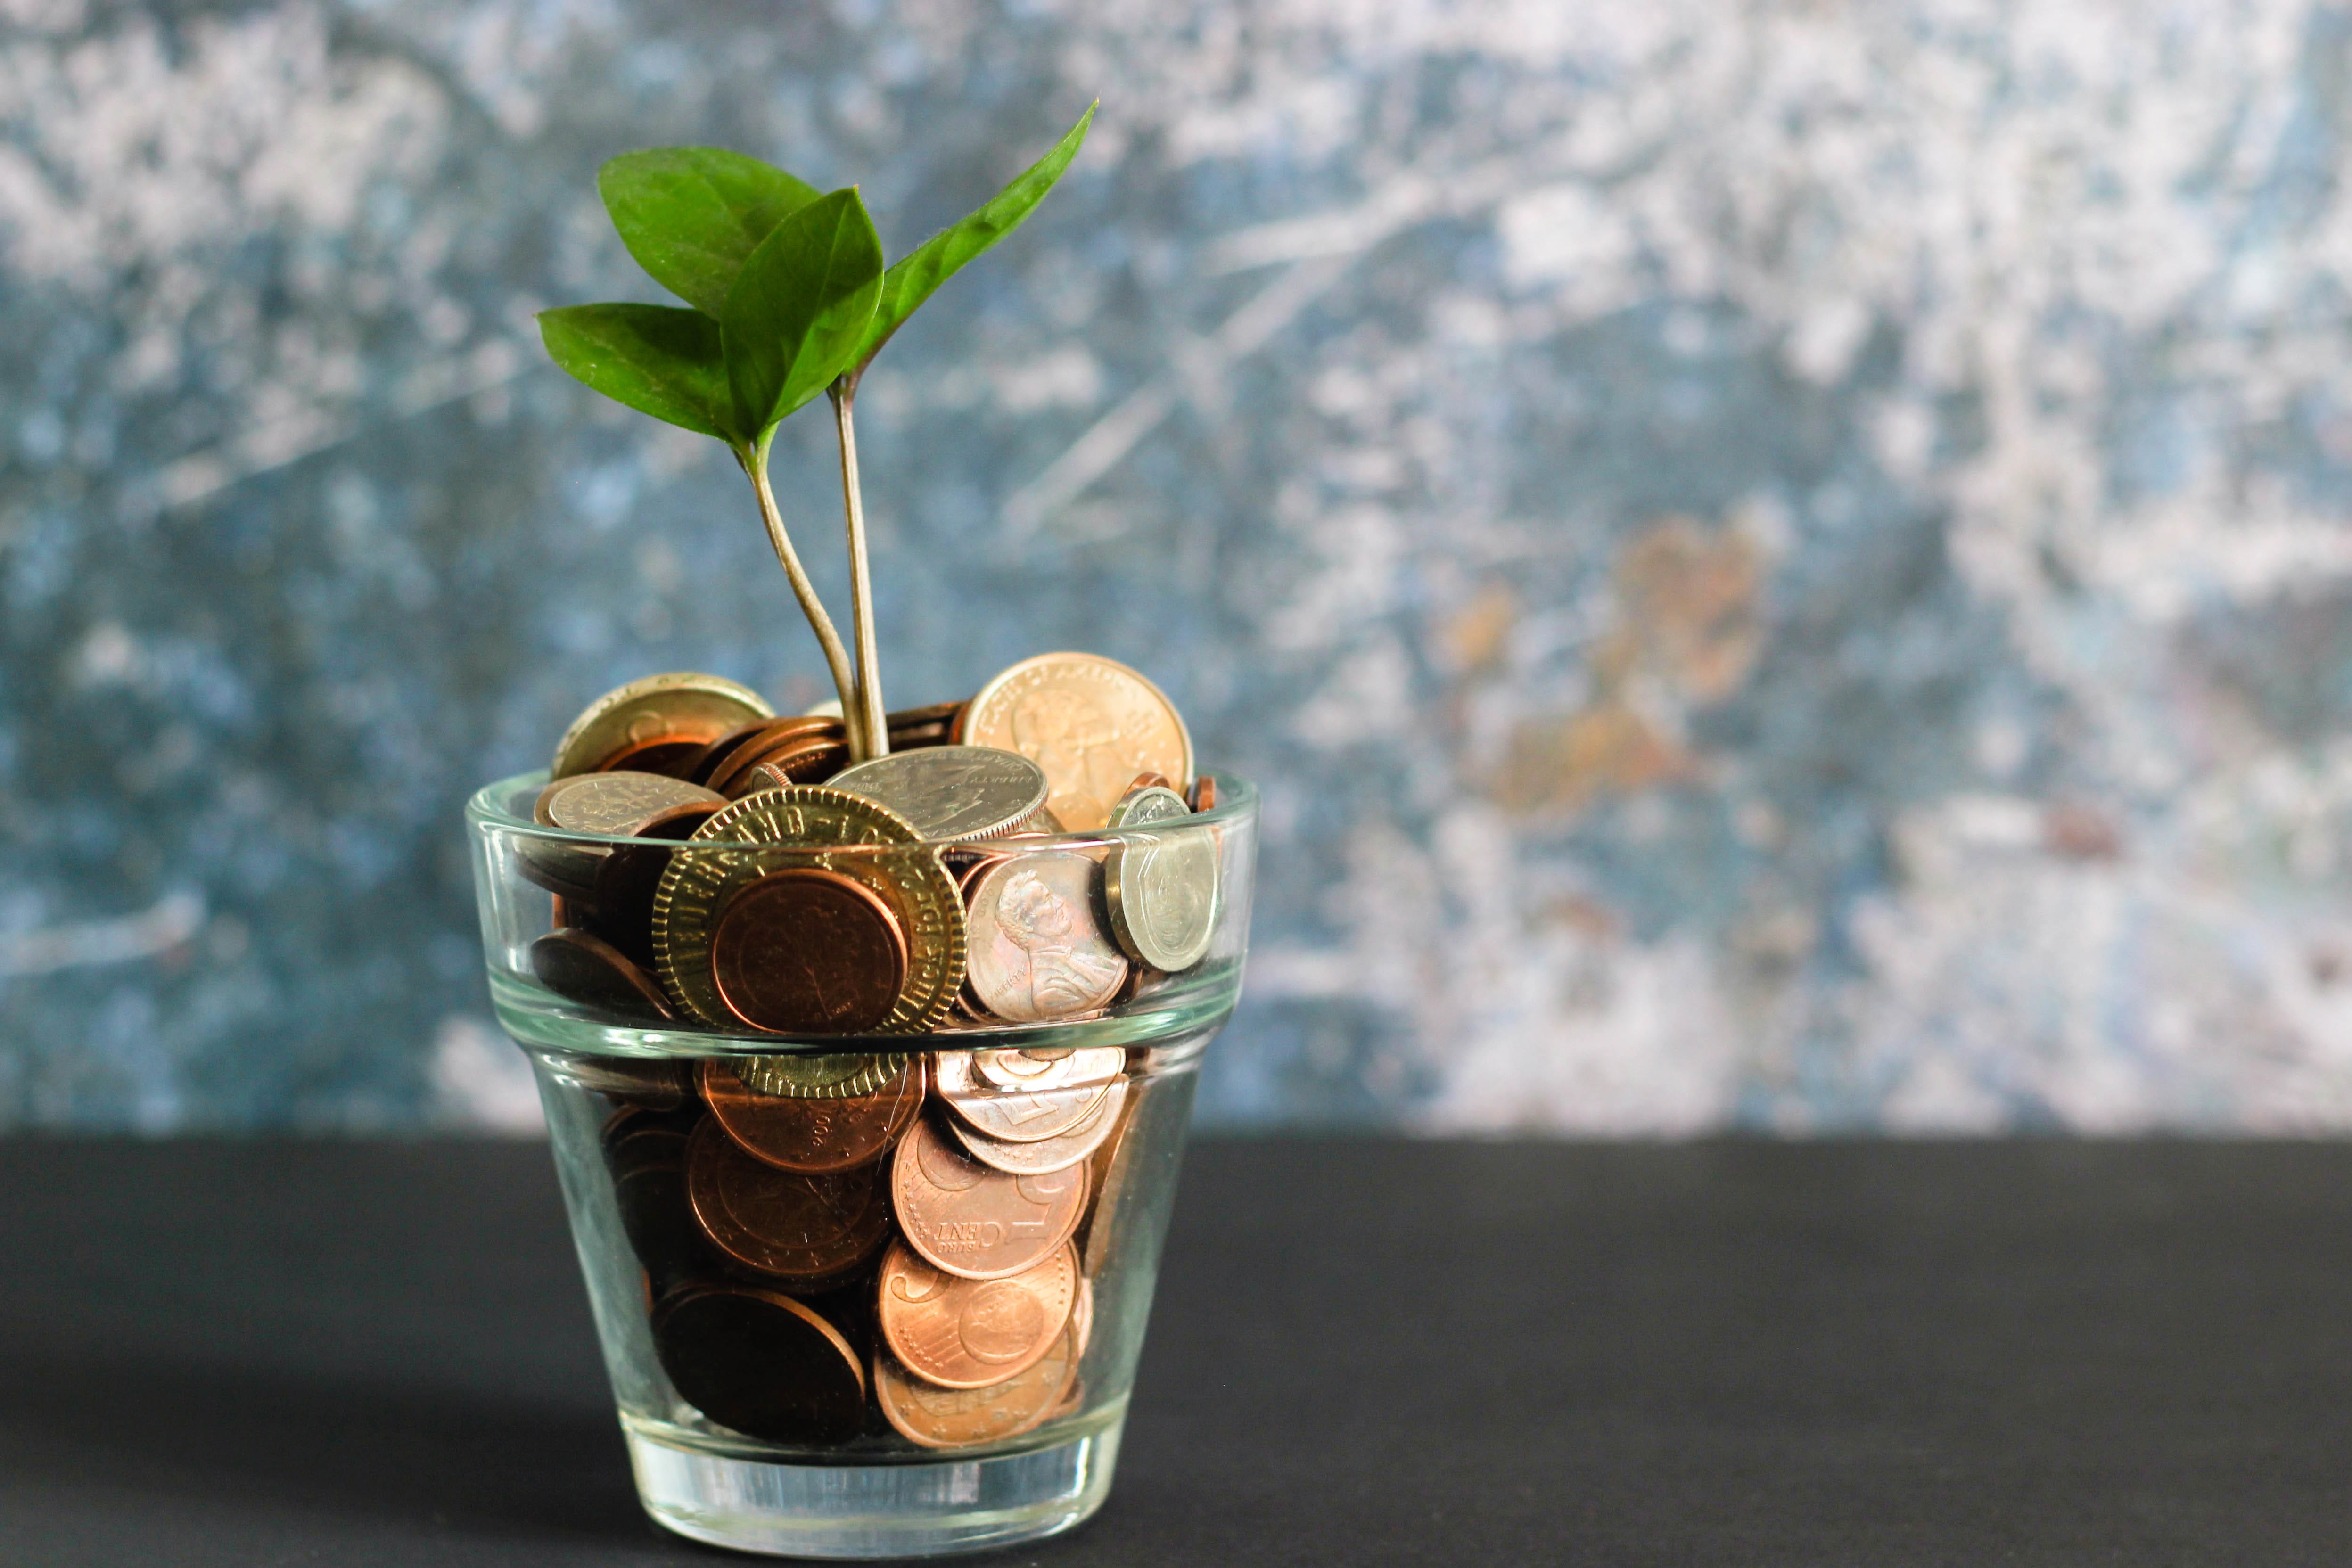 Coins in a cup with a leaf sprouting from them